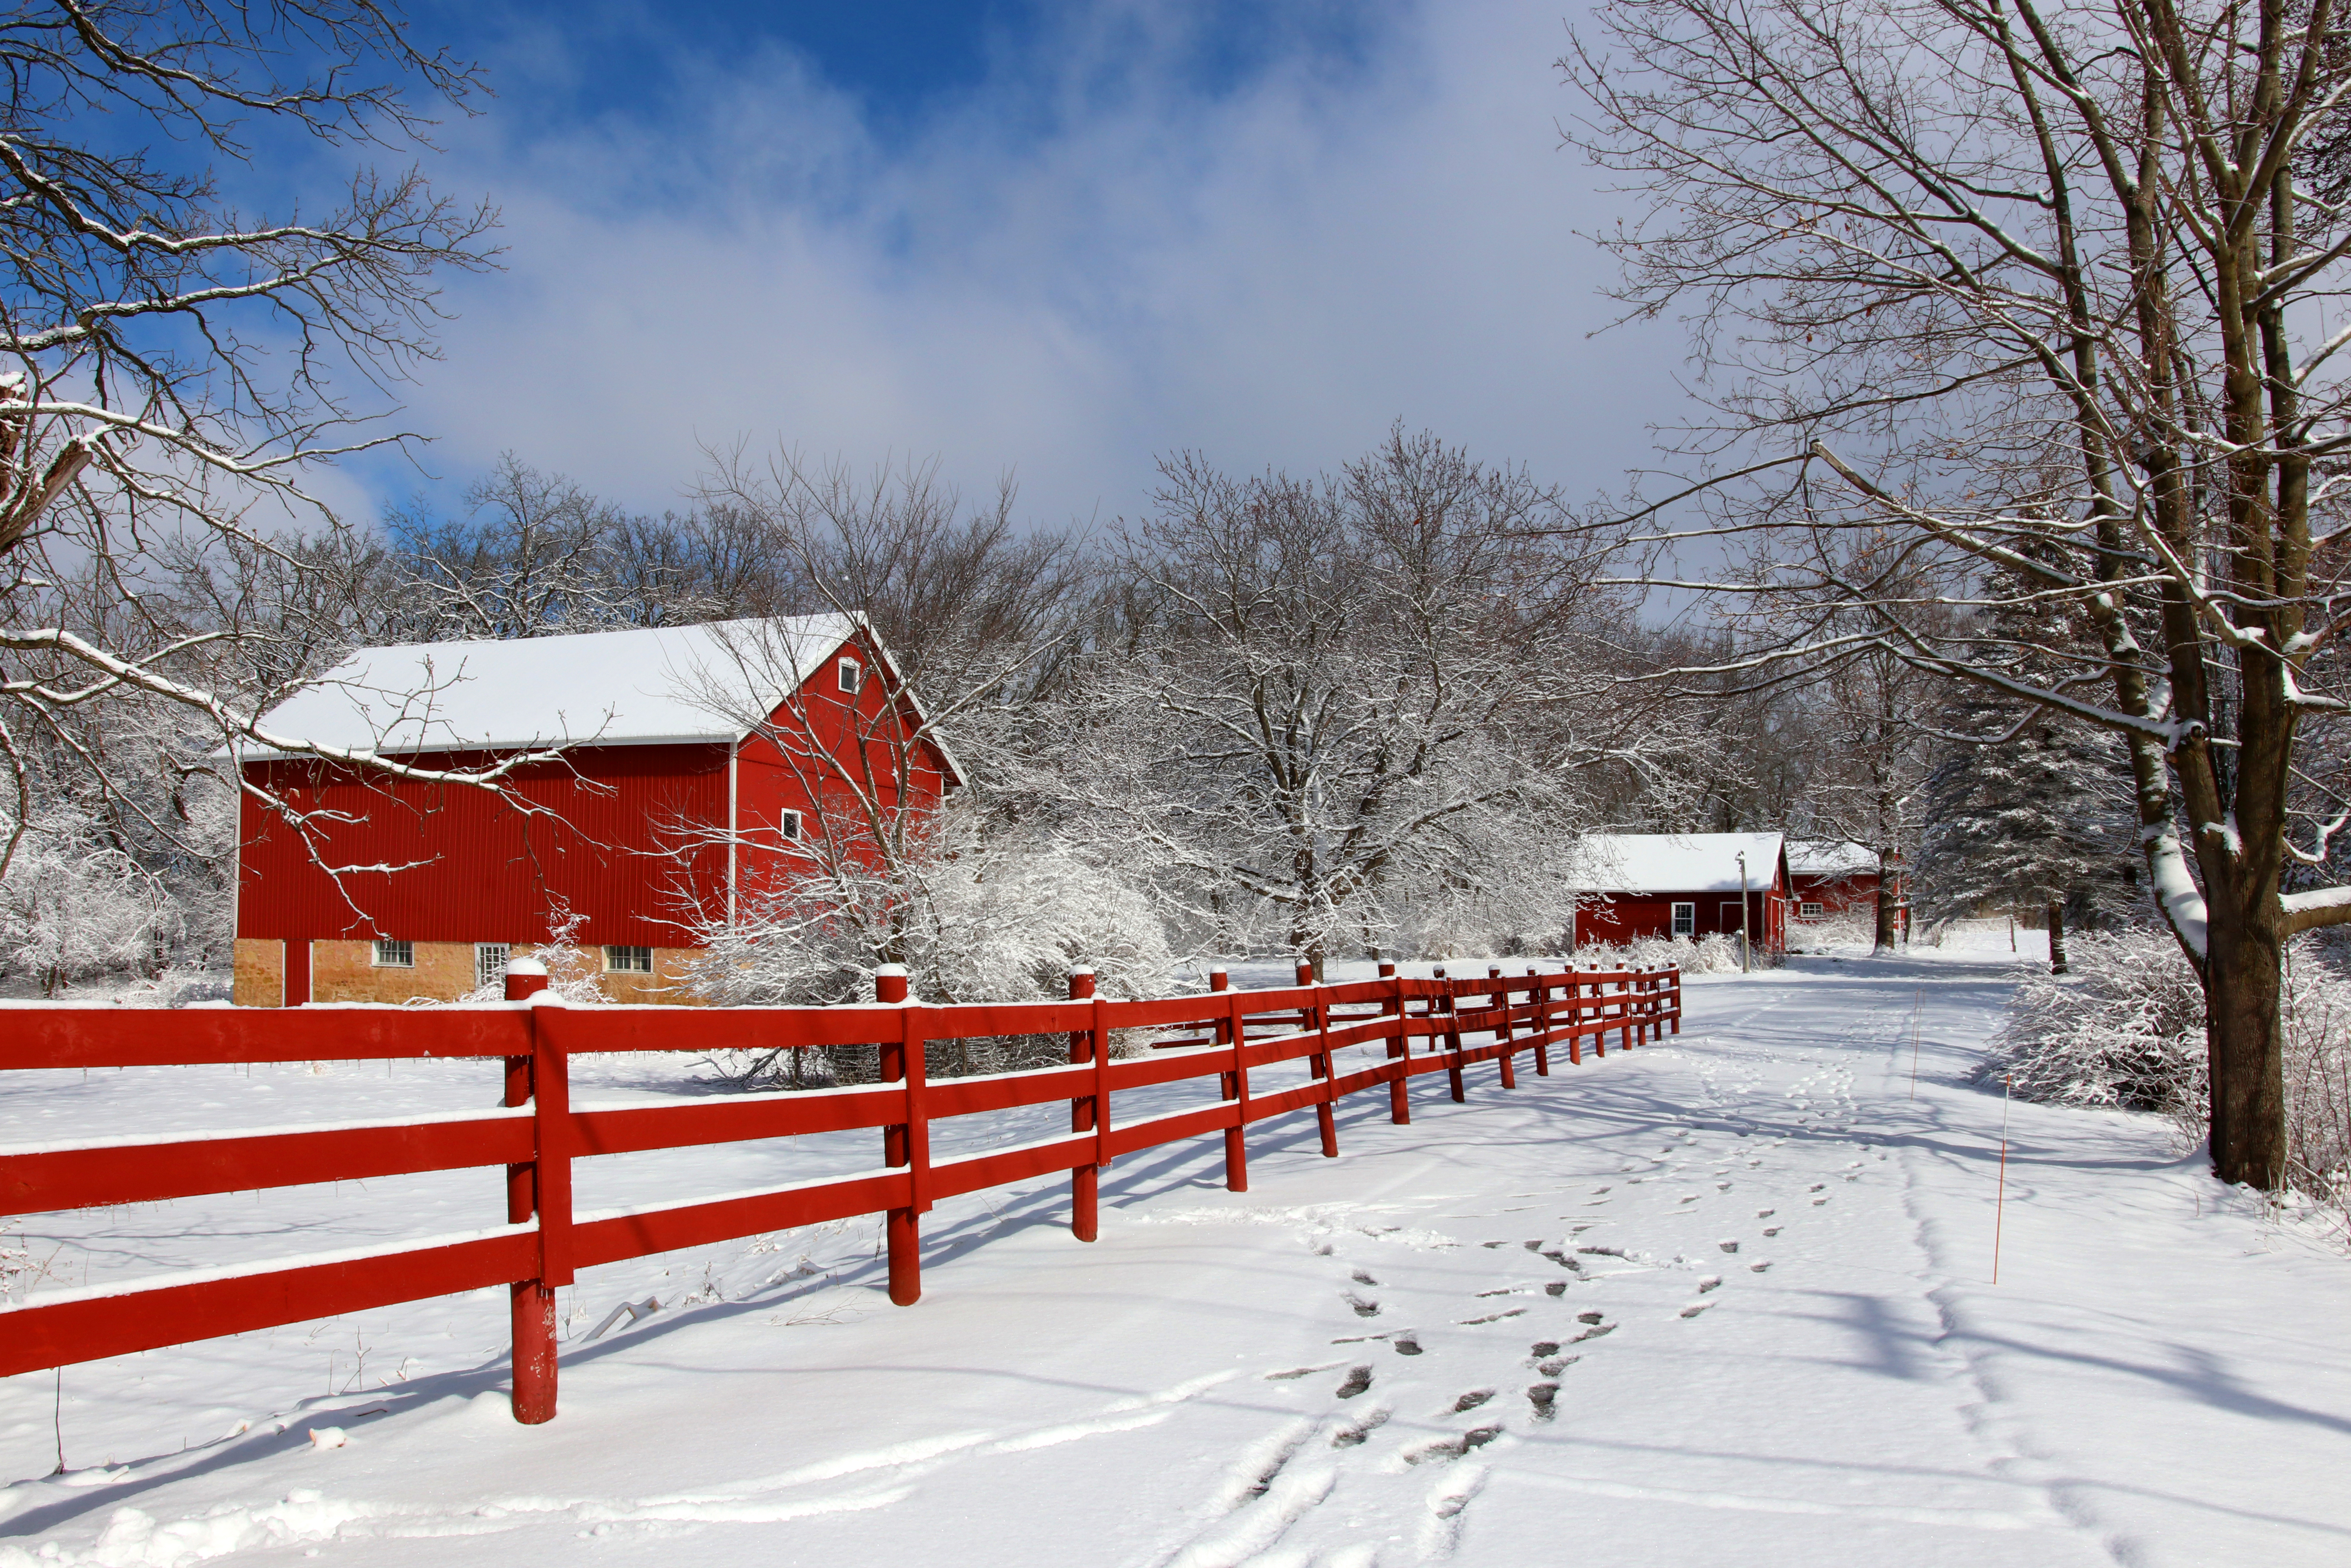 Agriculture and rural life at winter background.Rural landscape with red barn, wooden red fence and trees covered by fresh snow in sunlight. Scenic winter view at Wisconsin, Midwest USA, Madison area. - Image